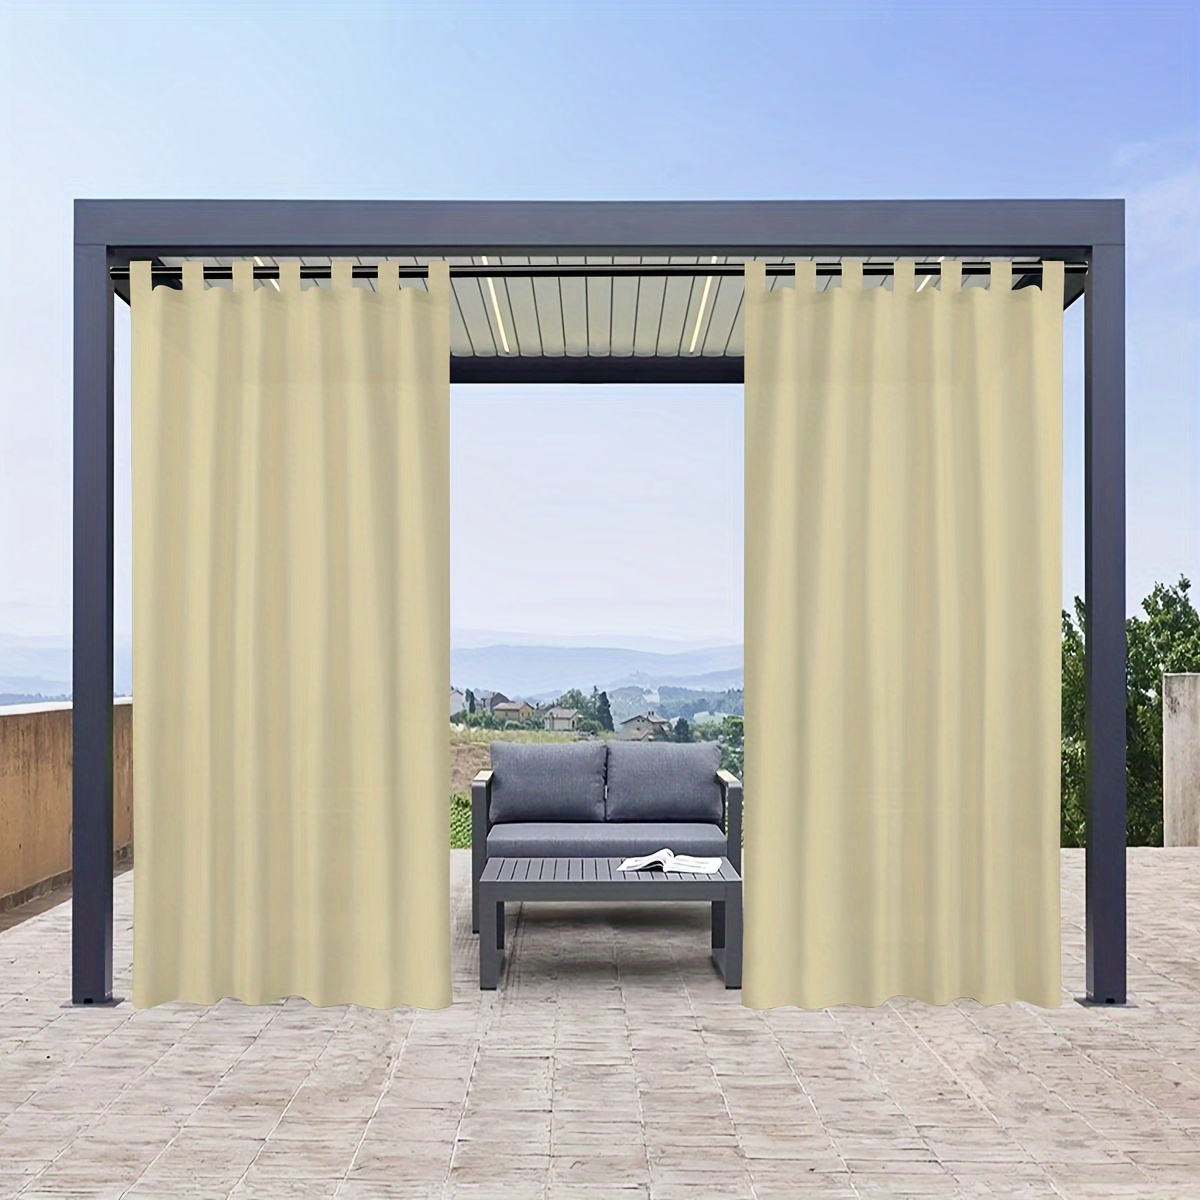 

1 Panel Waterproof Outdoor Curtains For Patio, Premium Privacy Weatherproof Tape Top Outside Curtains For Porch, Pergola, Cabana